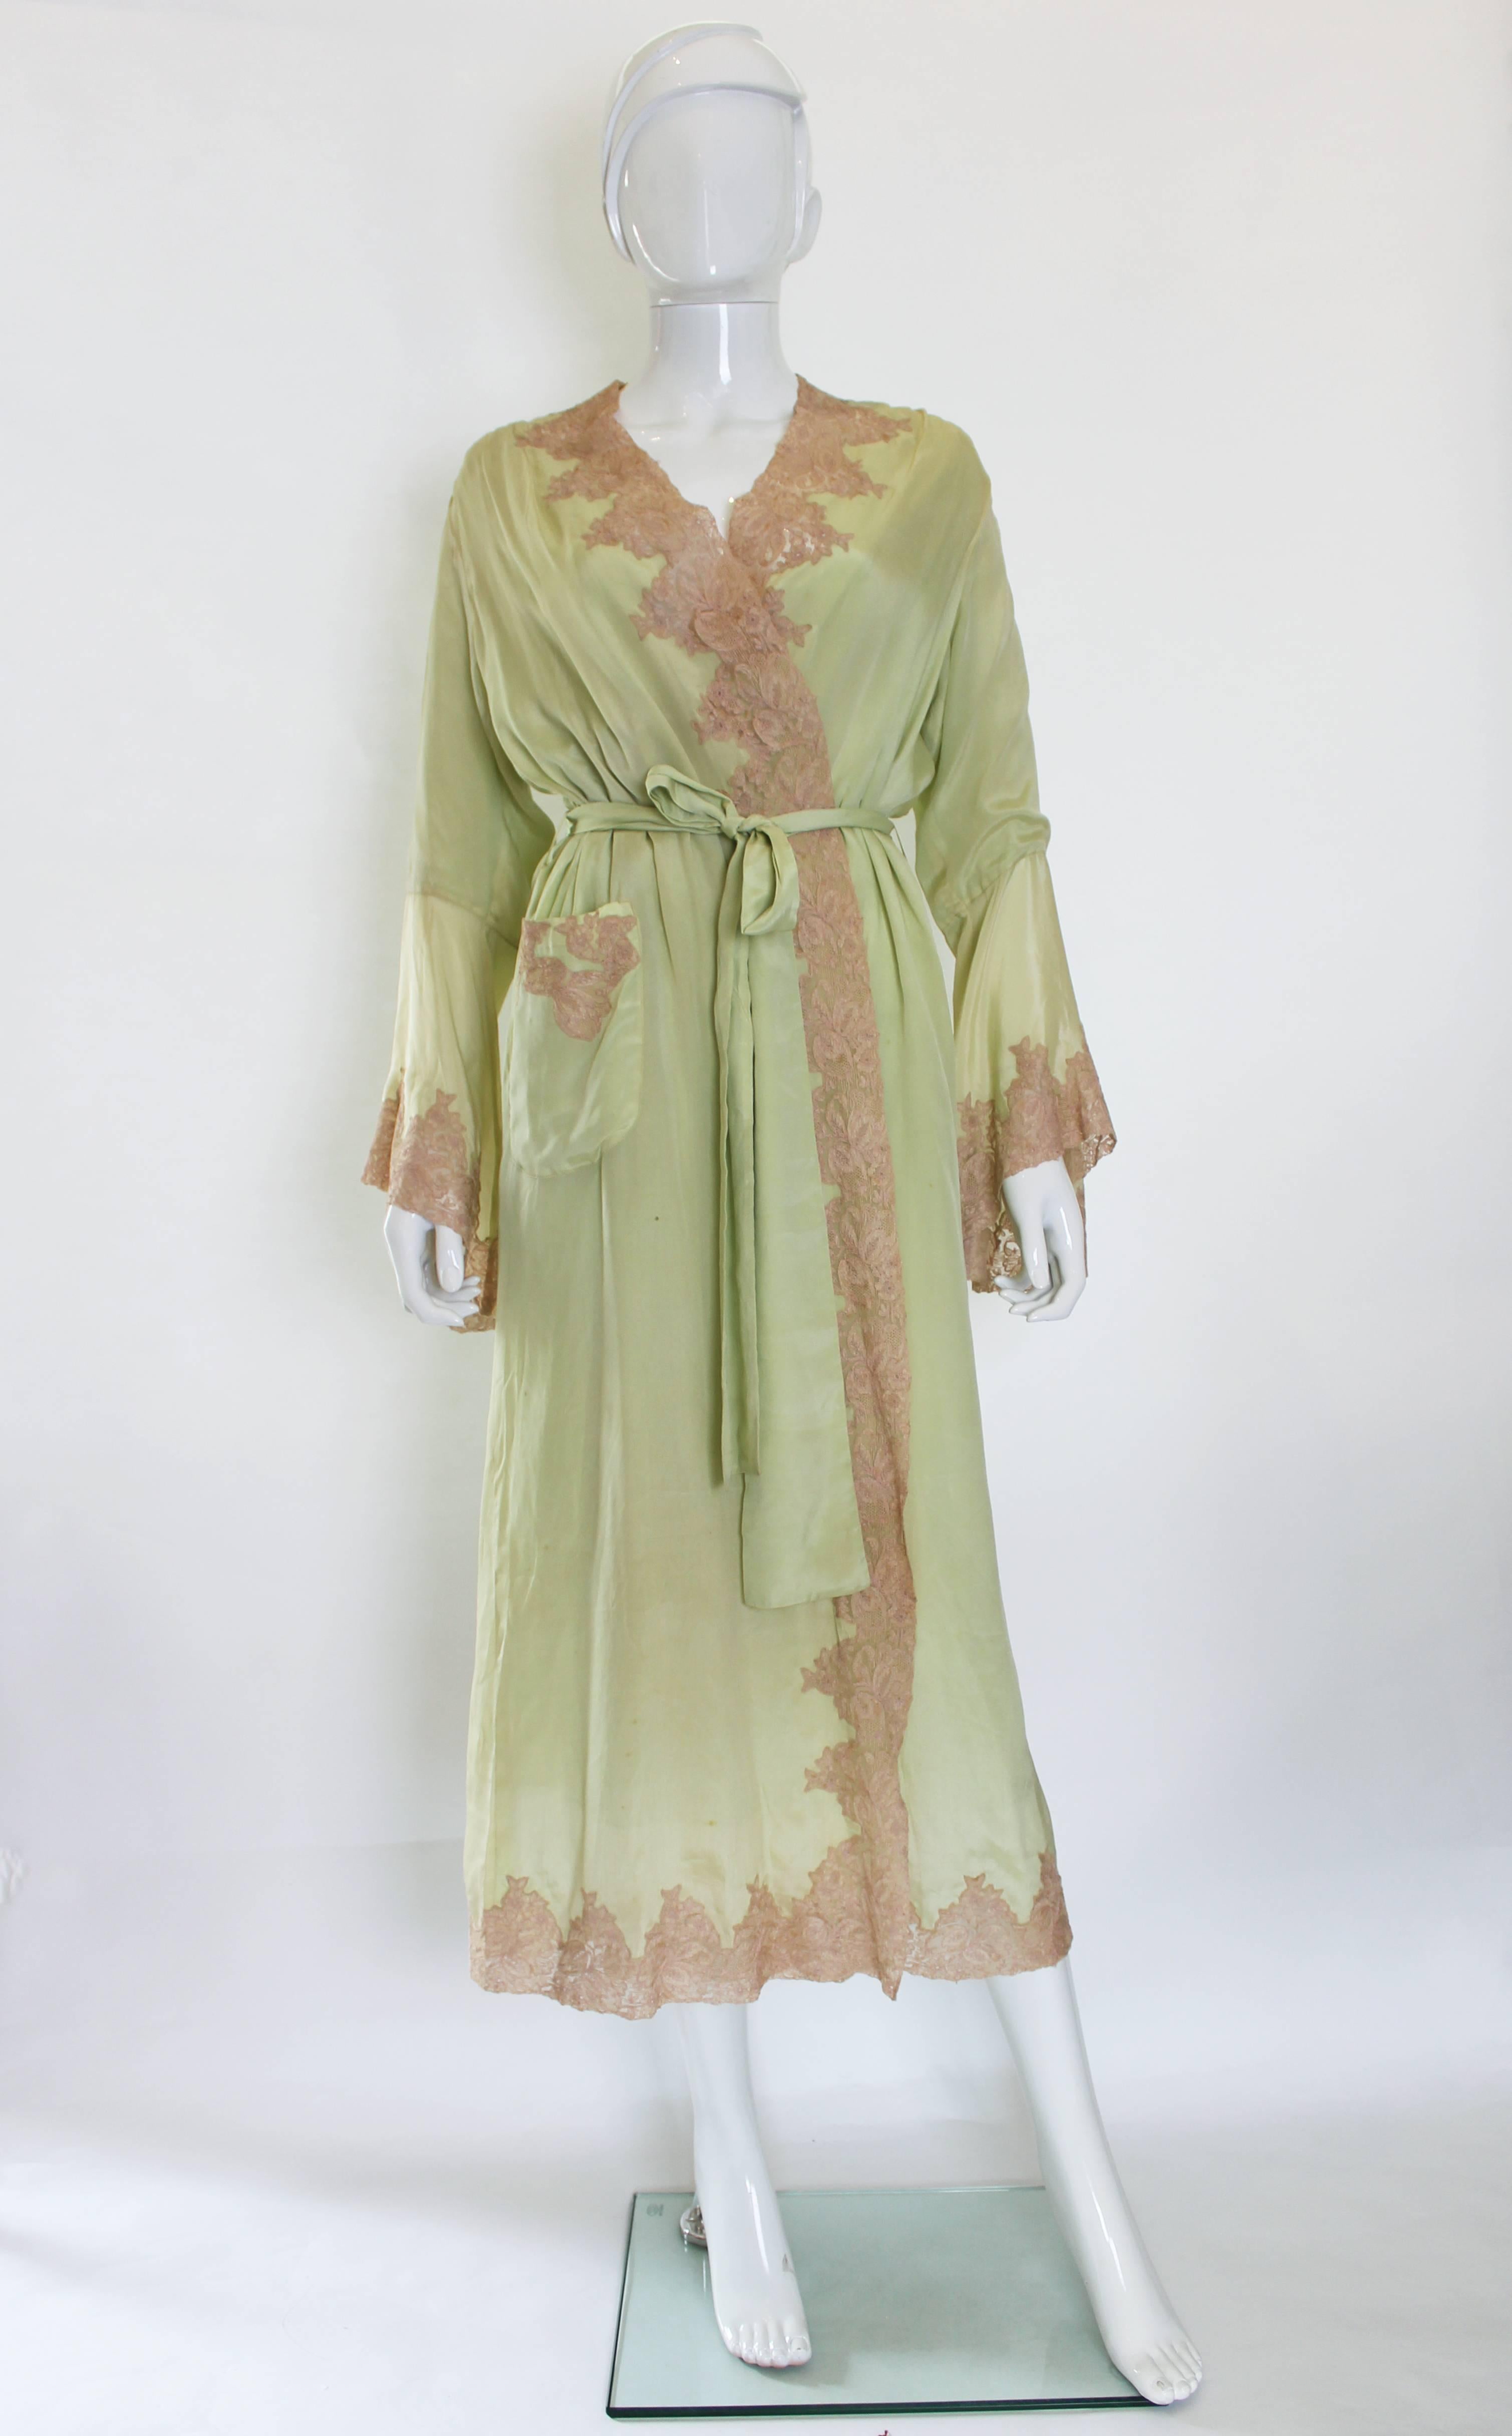 A stunning full length negligee in pistachio green silk, with biscuit coloured lace trim. The negligee is fully lined in silk, so it hangs beautilfuly. There is in internal tie belt and a 4 inch wide belt around the gown. The lace trim is around the